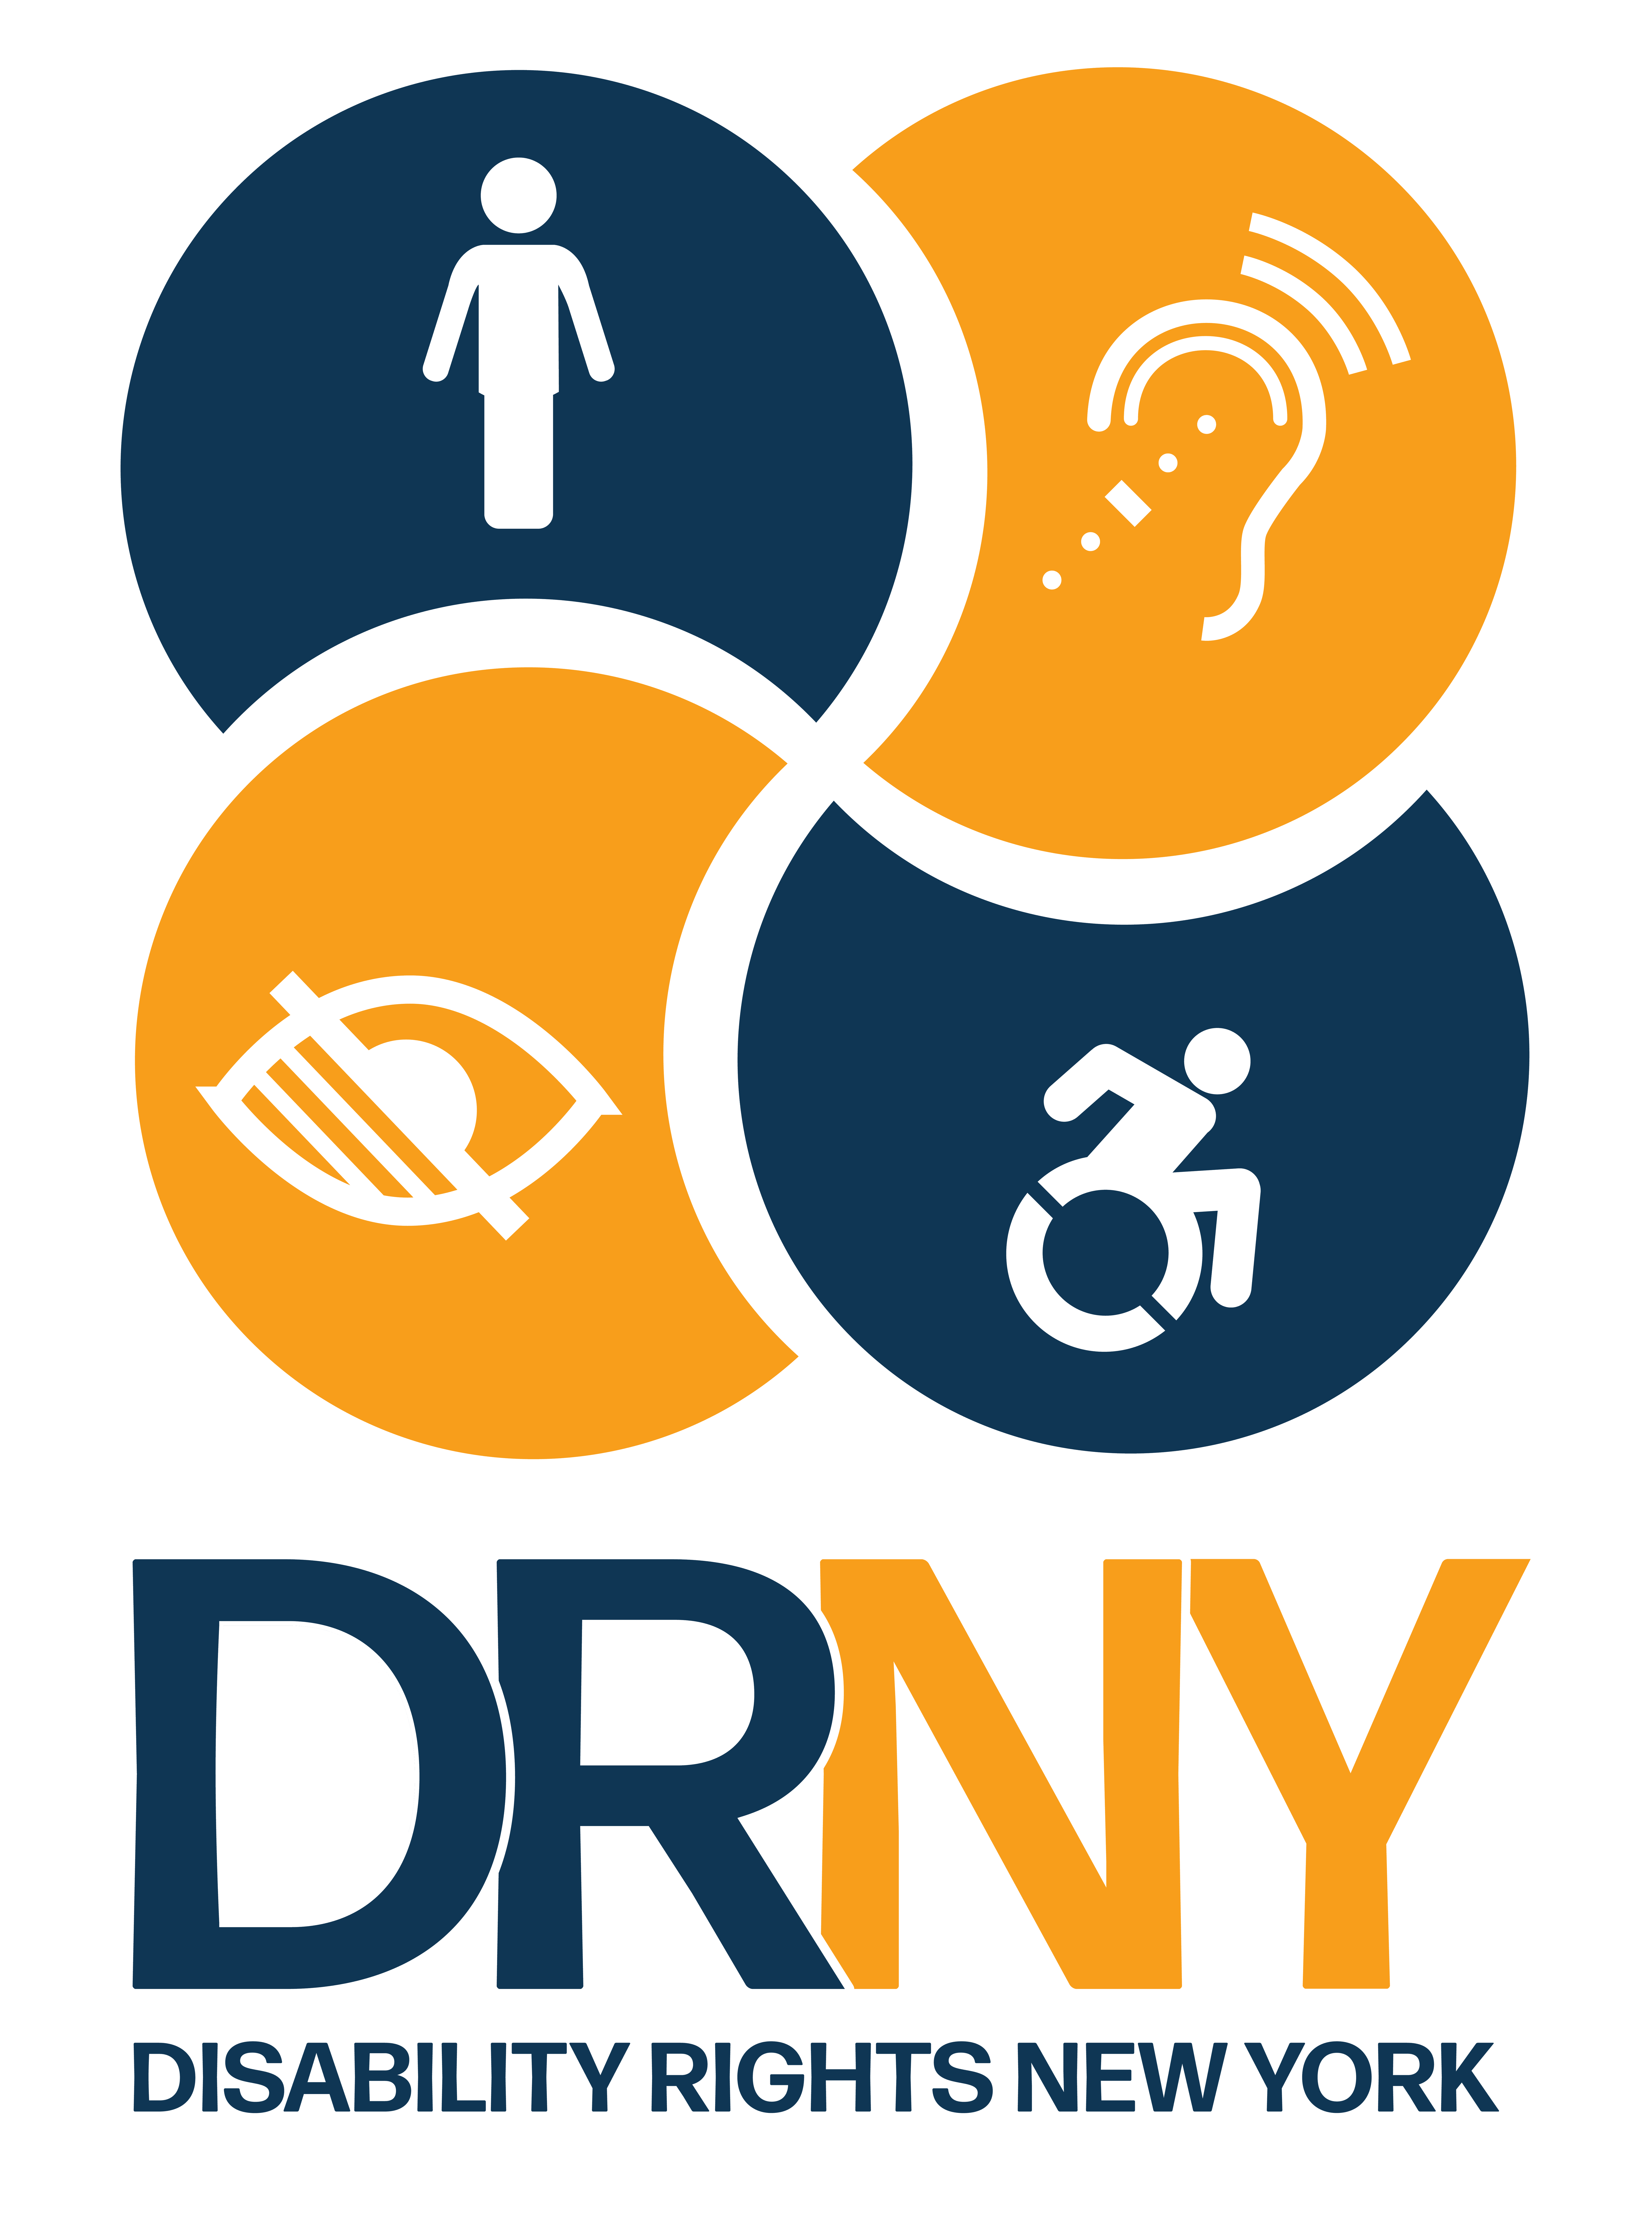 Images of a person standing, an ear with hearing aide, an eye with a lien through it indicating blindness, and a person is a wheelchair. Below it says Disability Rights New York